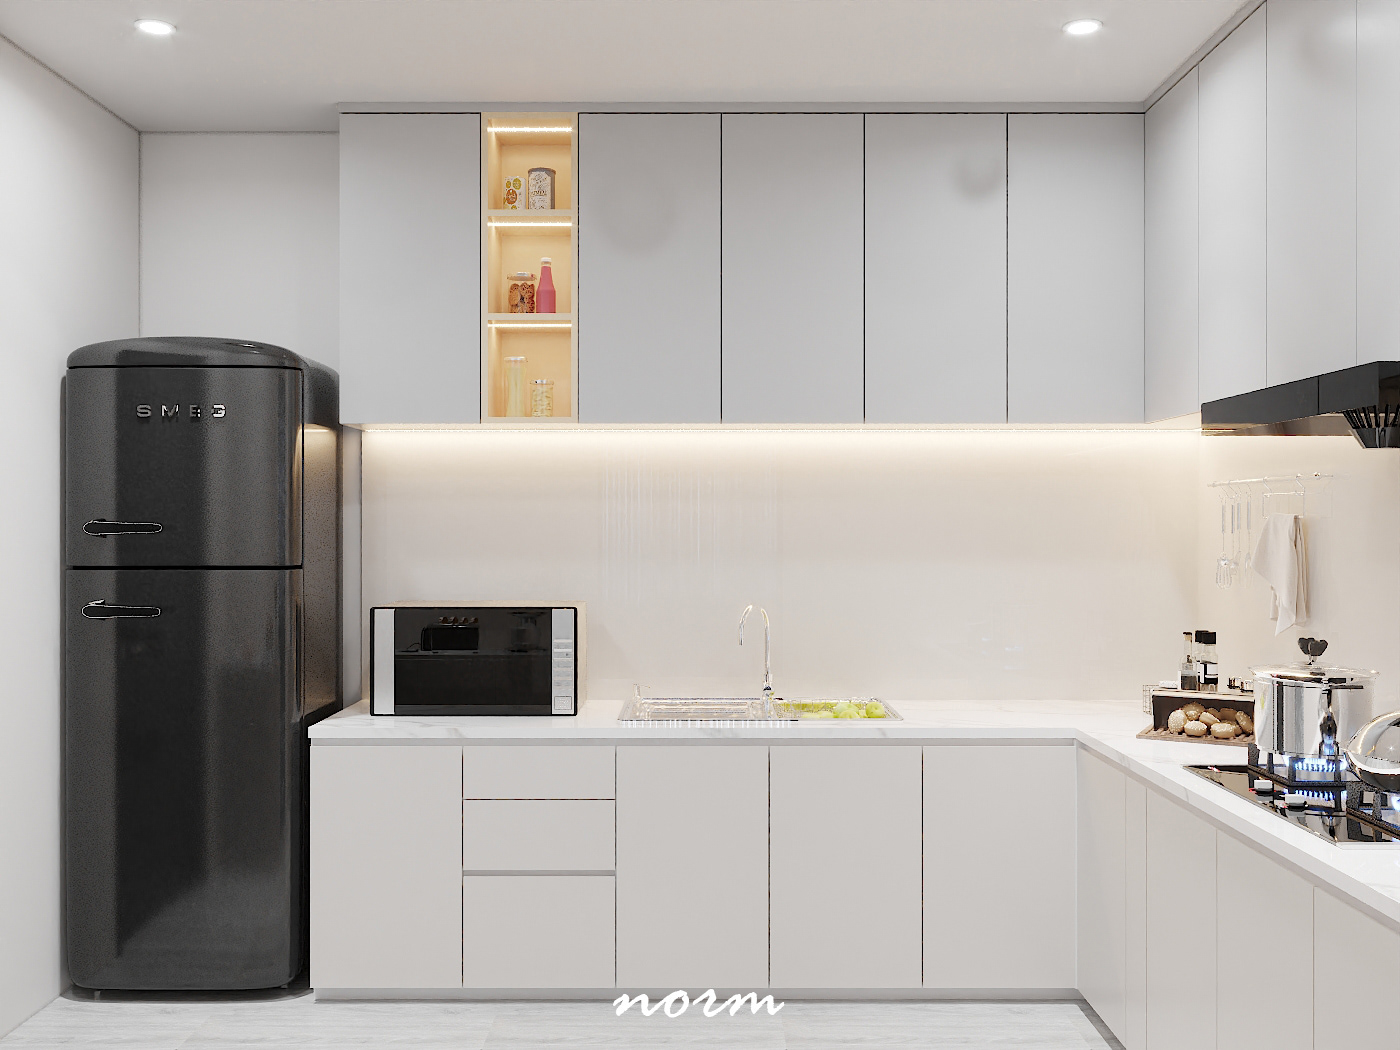 This kitchen has plenty of counter space and a well-supported lighting system. Furthermore, devices in this area are very modern and versatile. They are properly arranged to maximize available space while remaining neat and simple in the kitchen process.